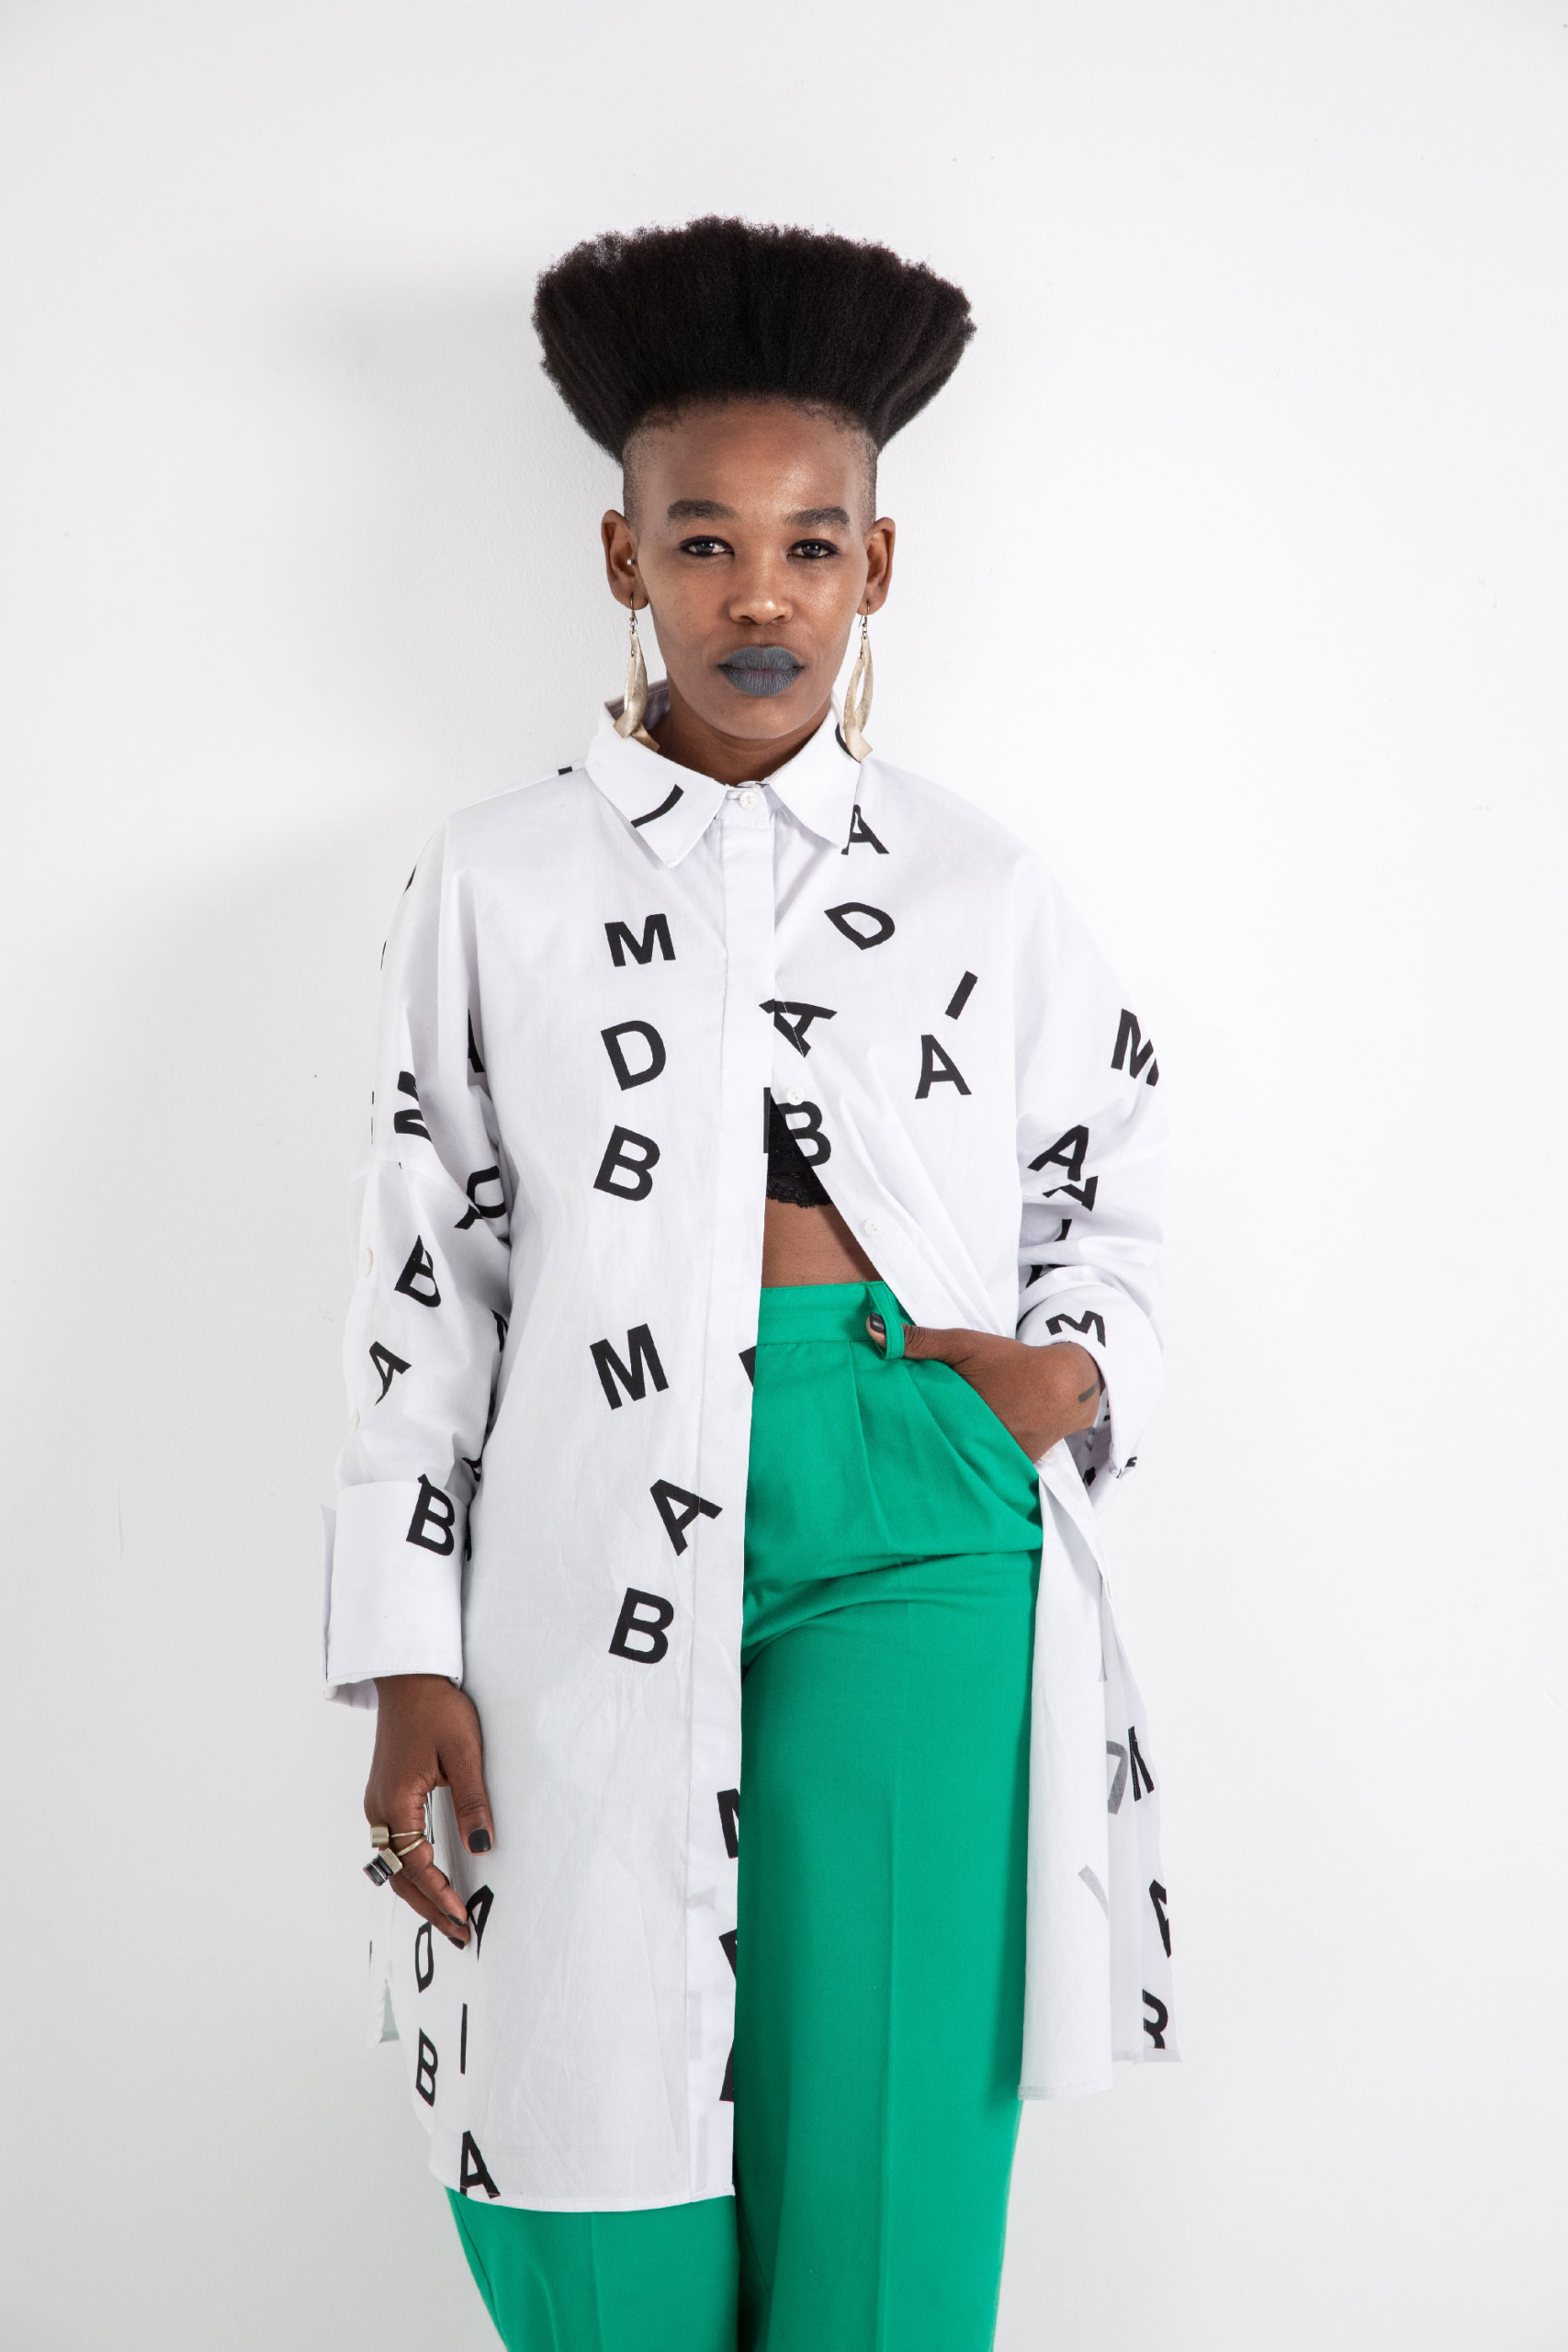 Curator Khansiliye Mbongwa, a blck person with upright curly hair looks straight into the camera, wearing bright green pants and a white coat with typography on it. The words on her coat say MAD.